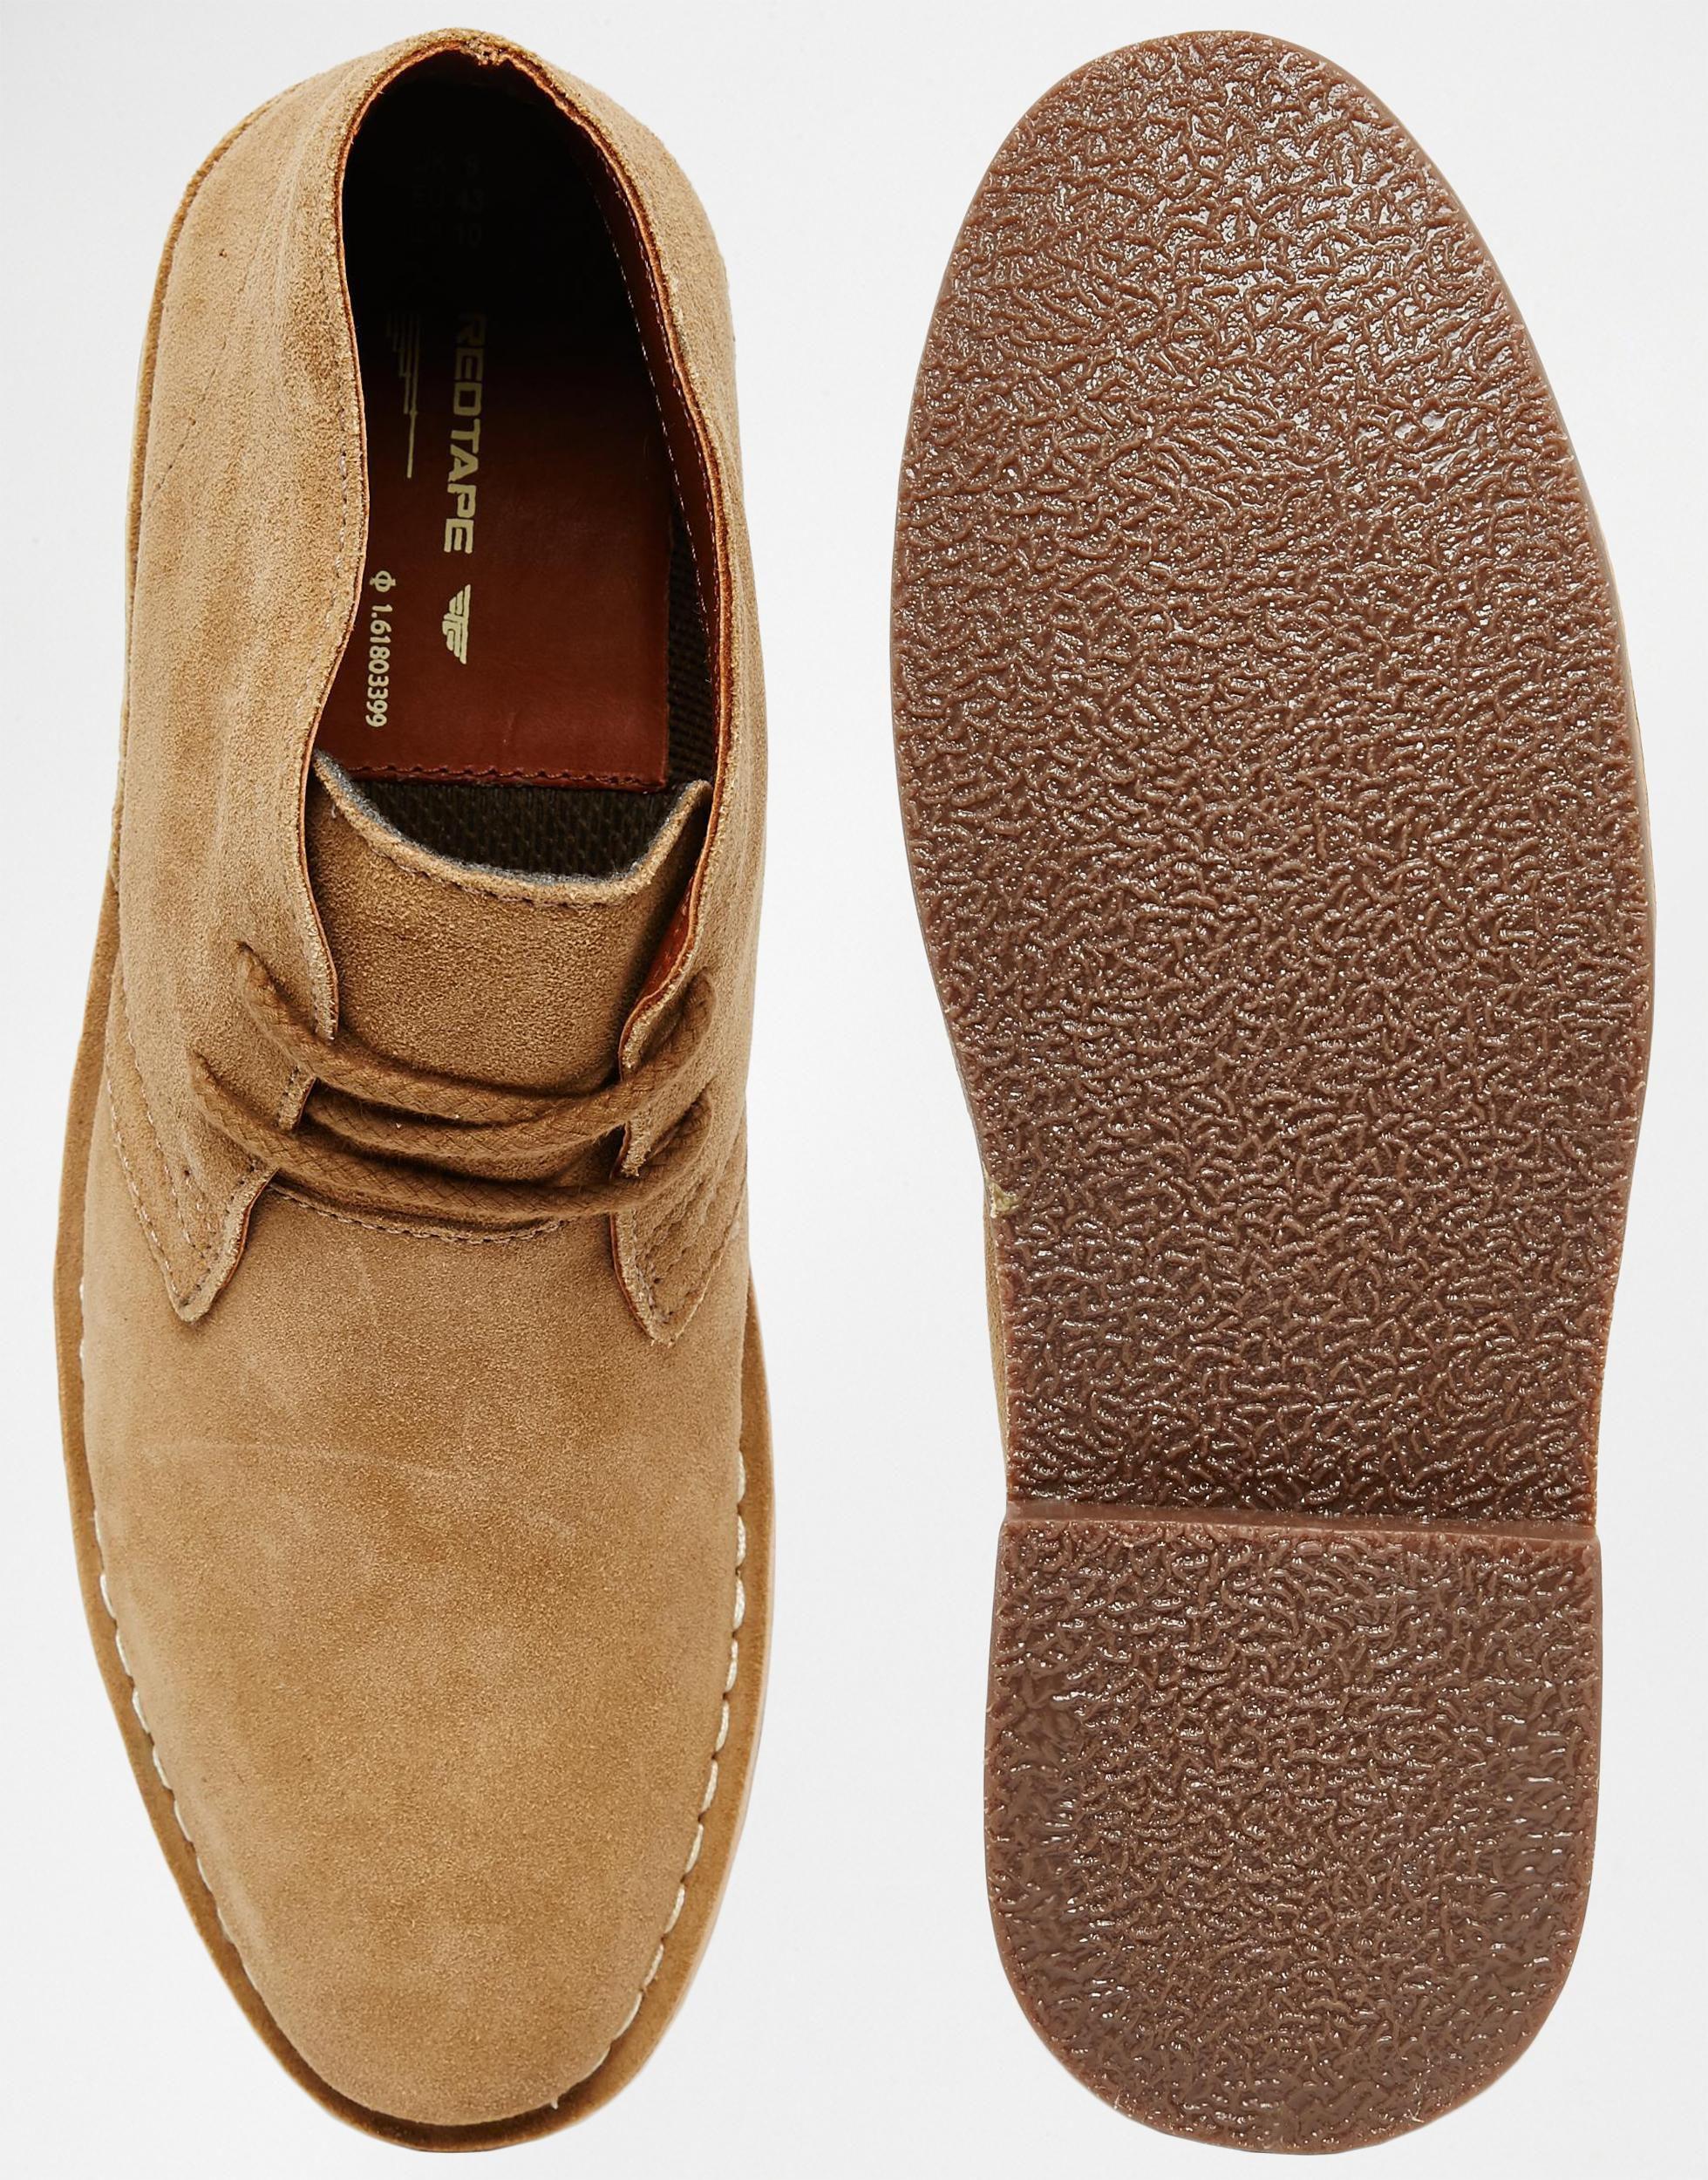 Red Tape Leather Suede Desert Boots - Beige for Men - Lyst